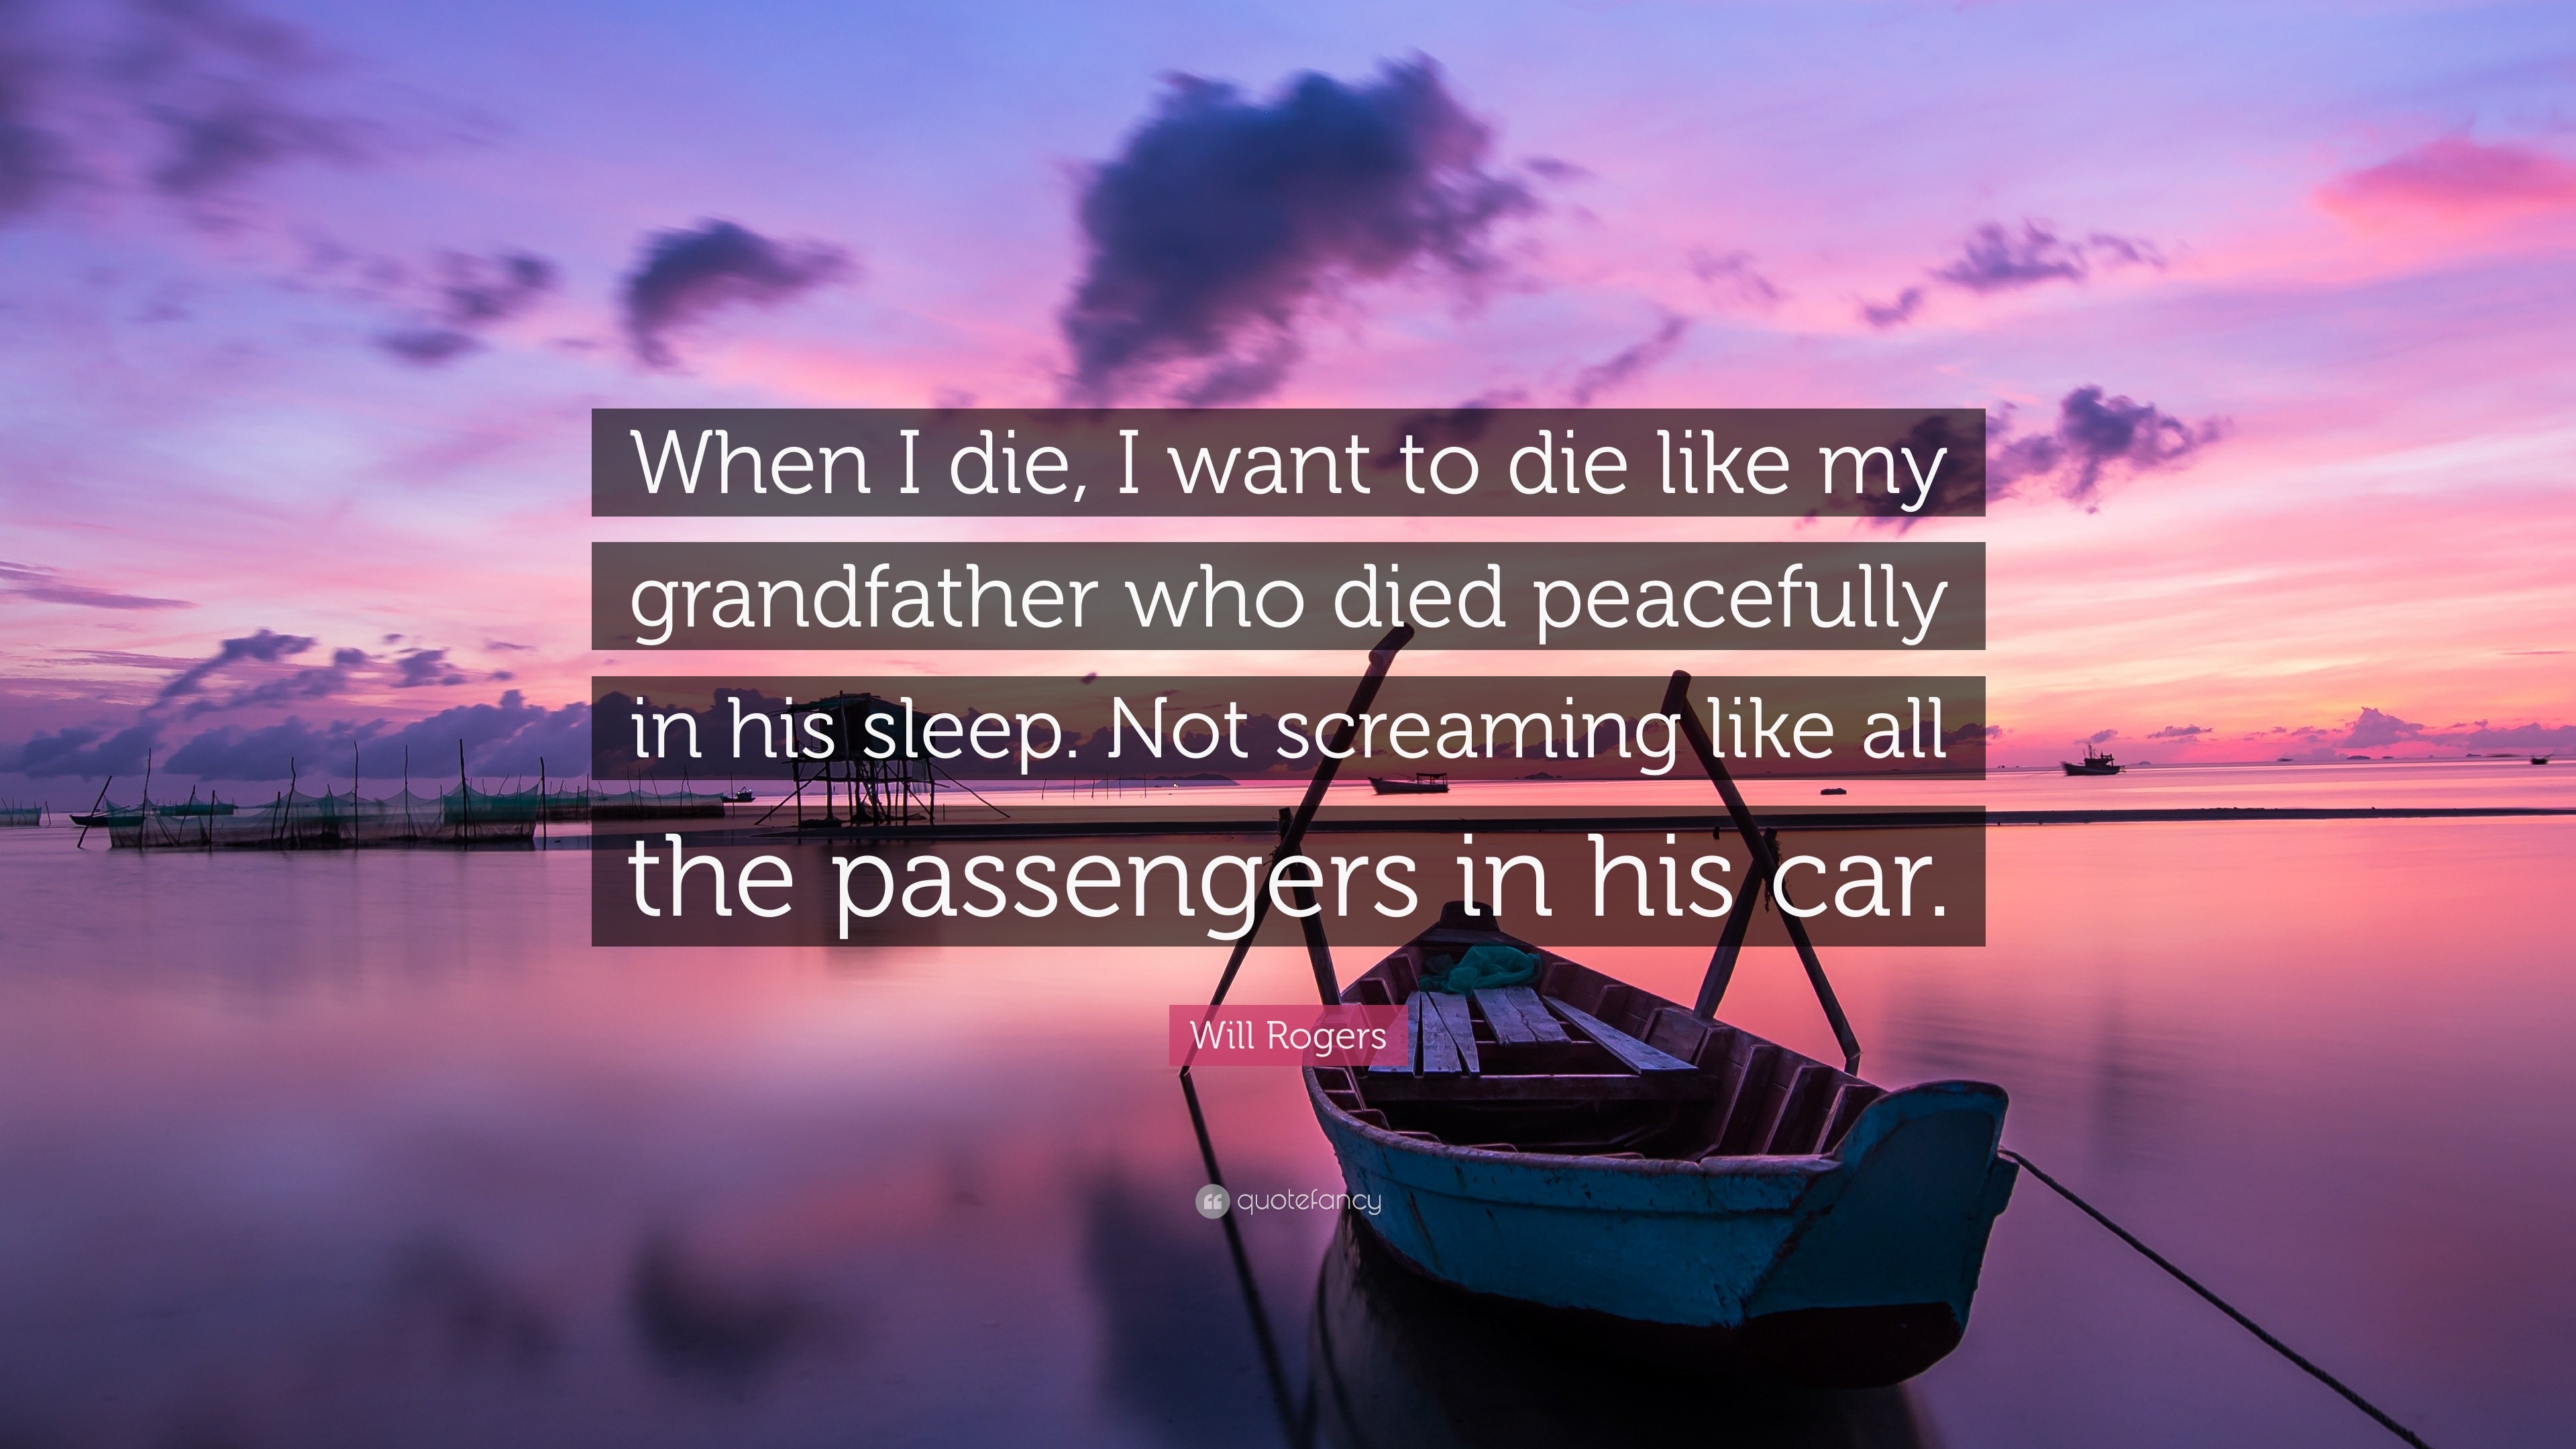 Will Rogers Quote: "When I die, I want to die like my grandfather who died peacefully in his ...